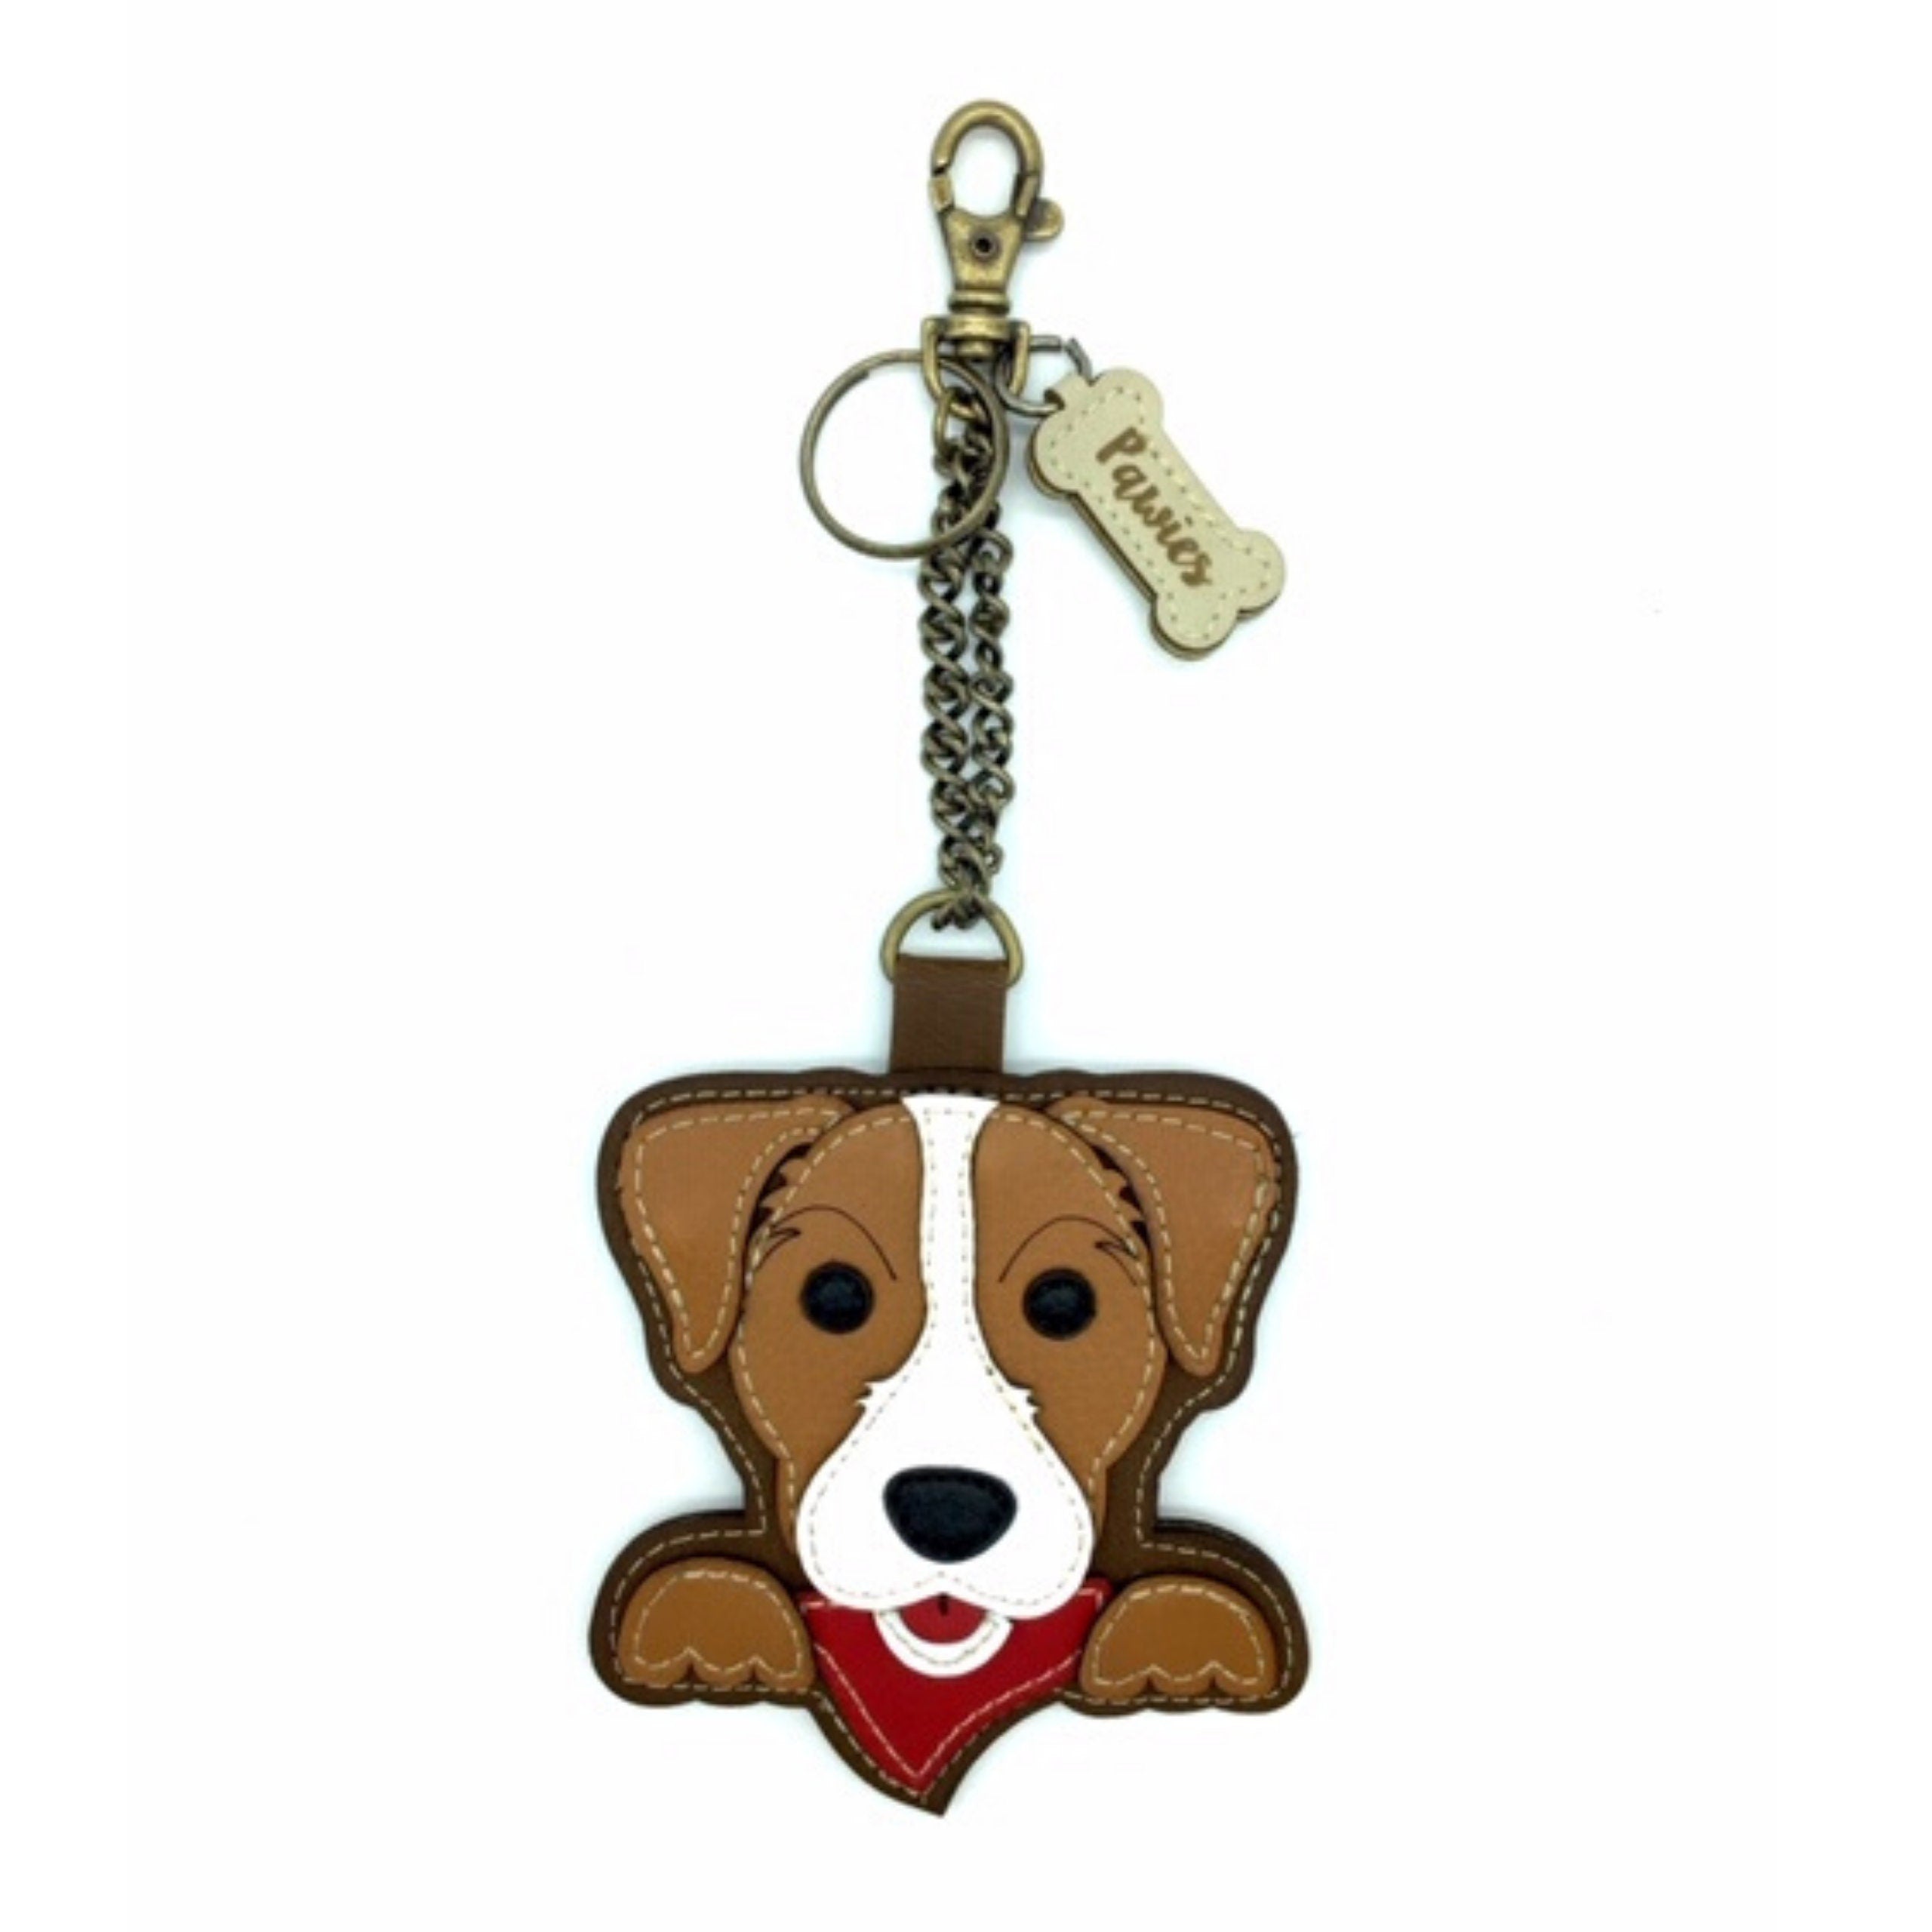 Jack Russell Keychain